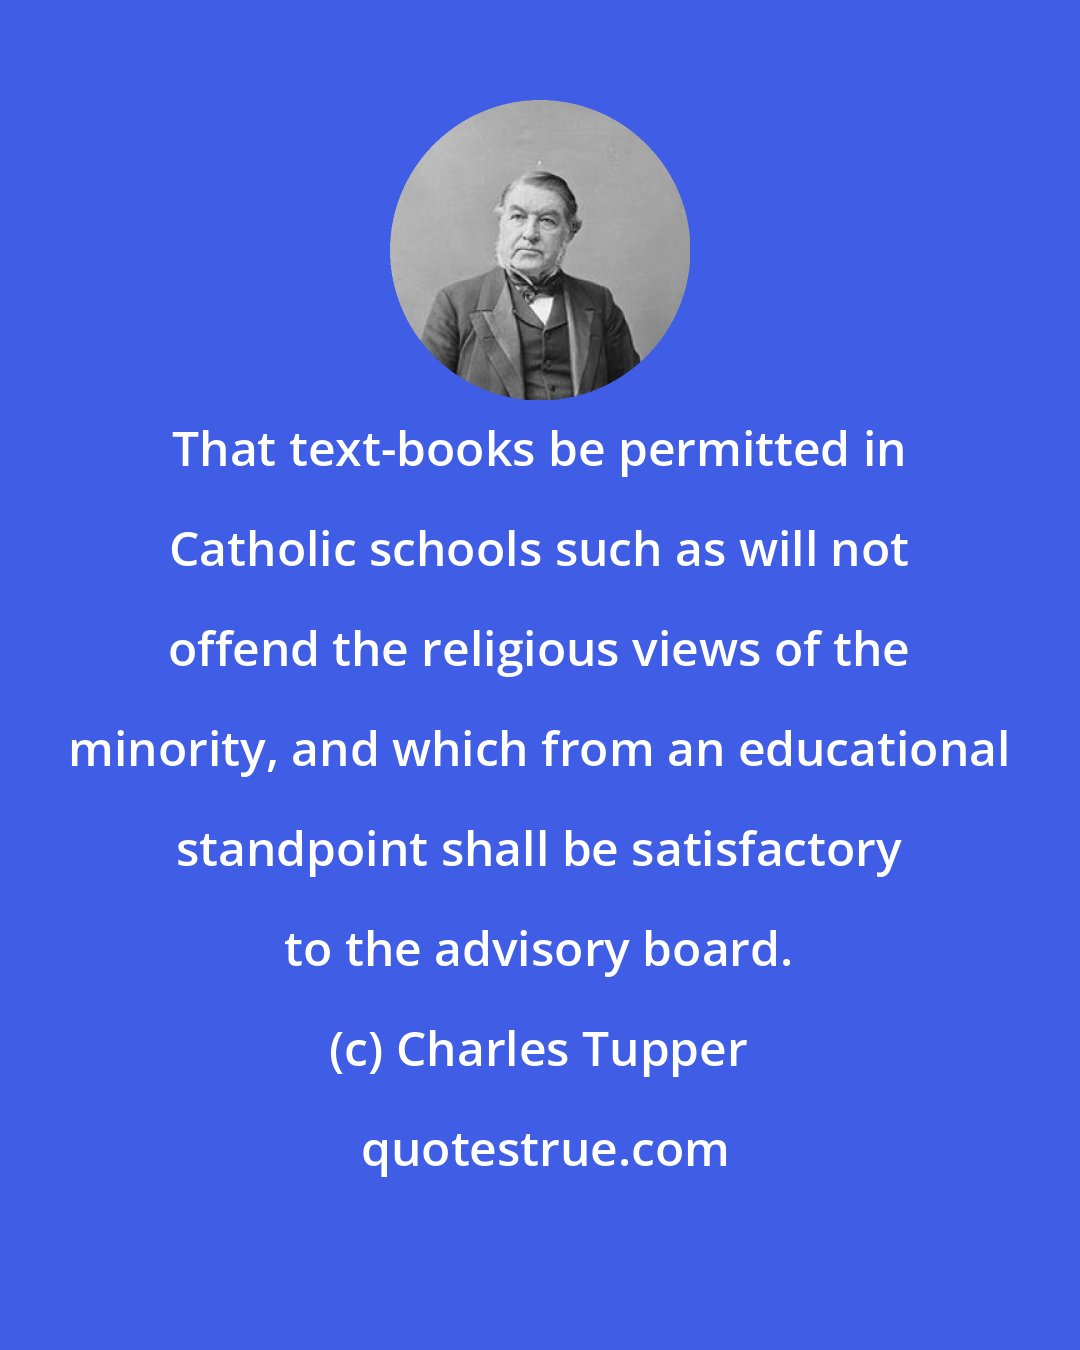 Charles Tupper: That text-books be permitted in Catholic schools such as will not offend the religious views of the minority, and which from an educational standpoint shall be satisfactory to the advisory board.